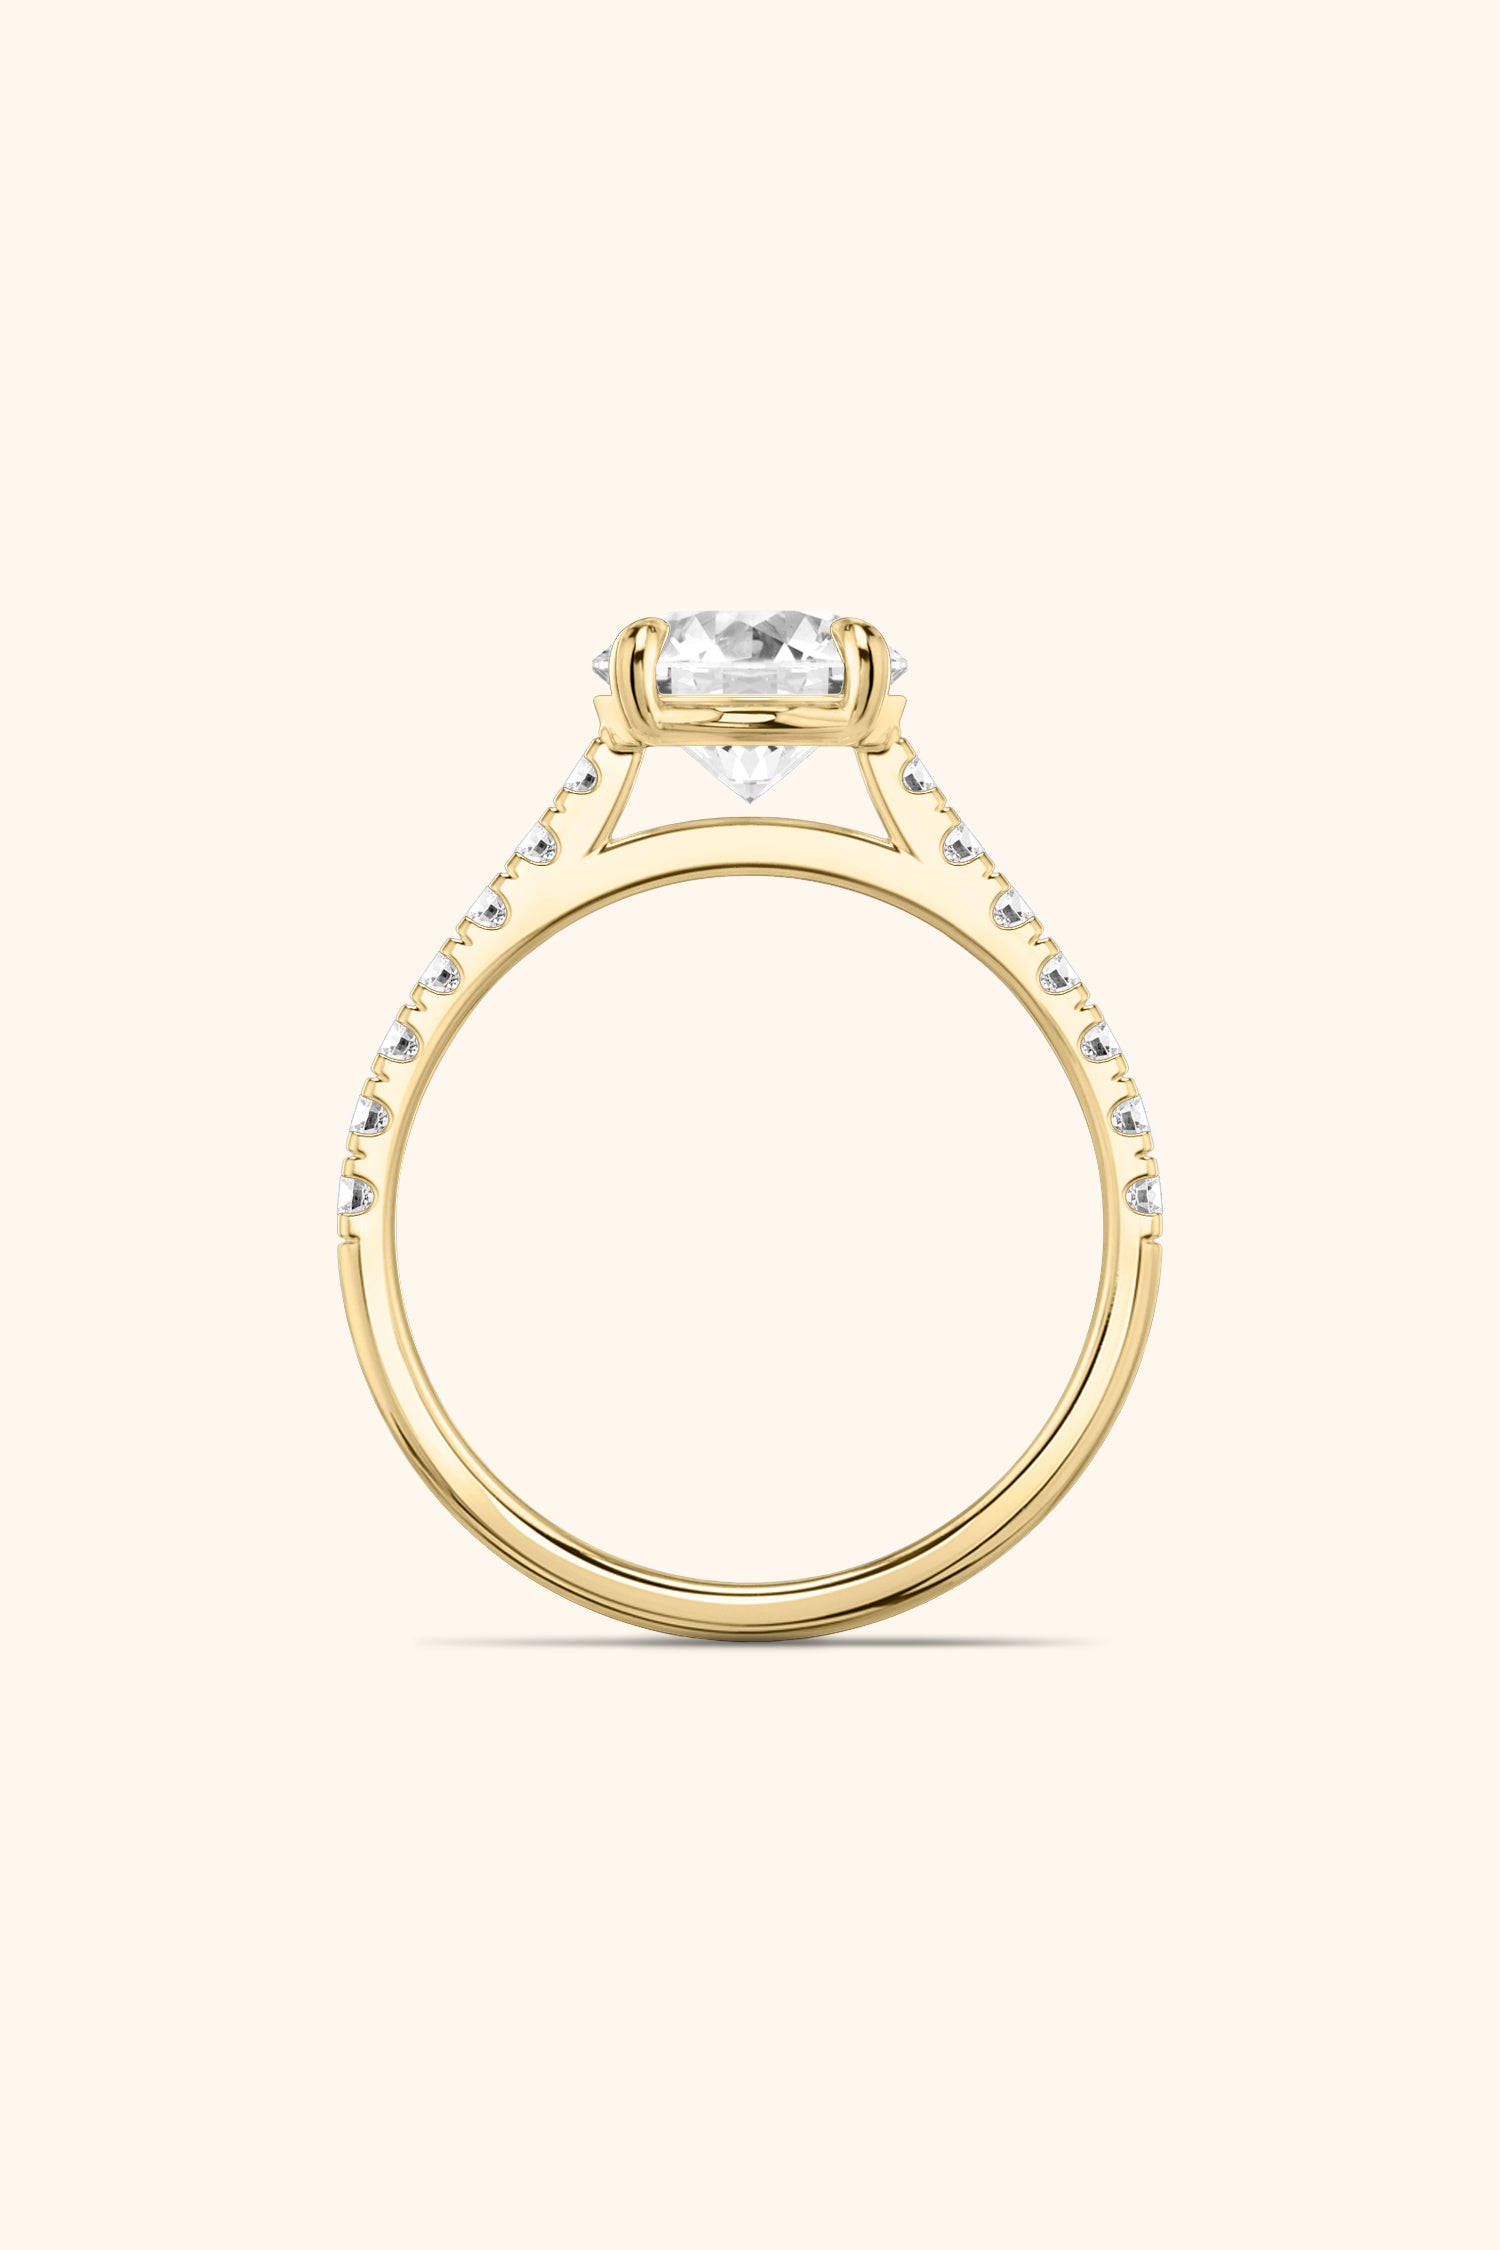 Gopuram Dome with a Round Solitaire Pavé Ring